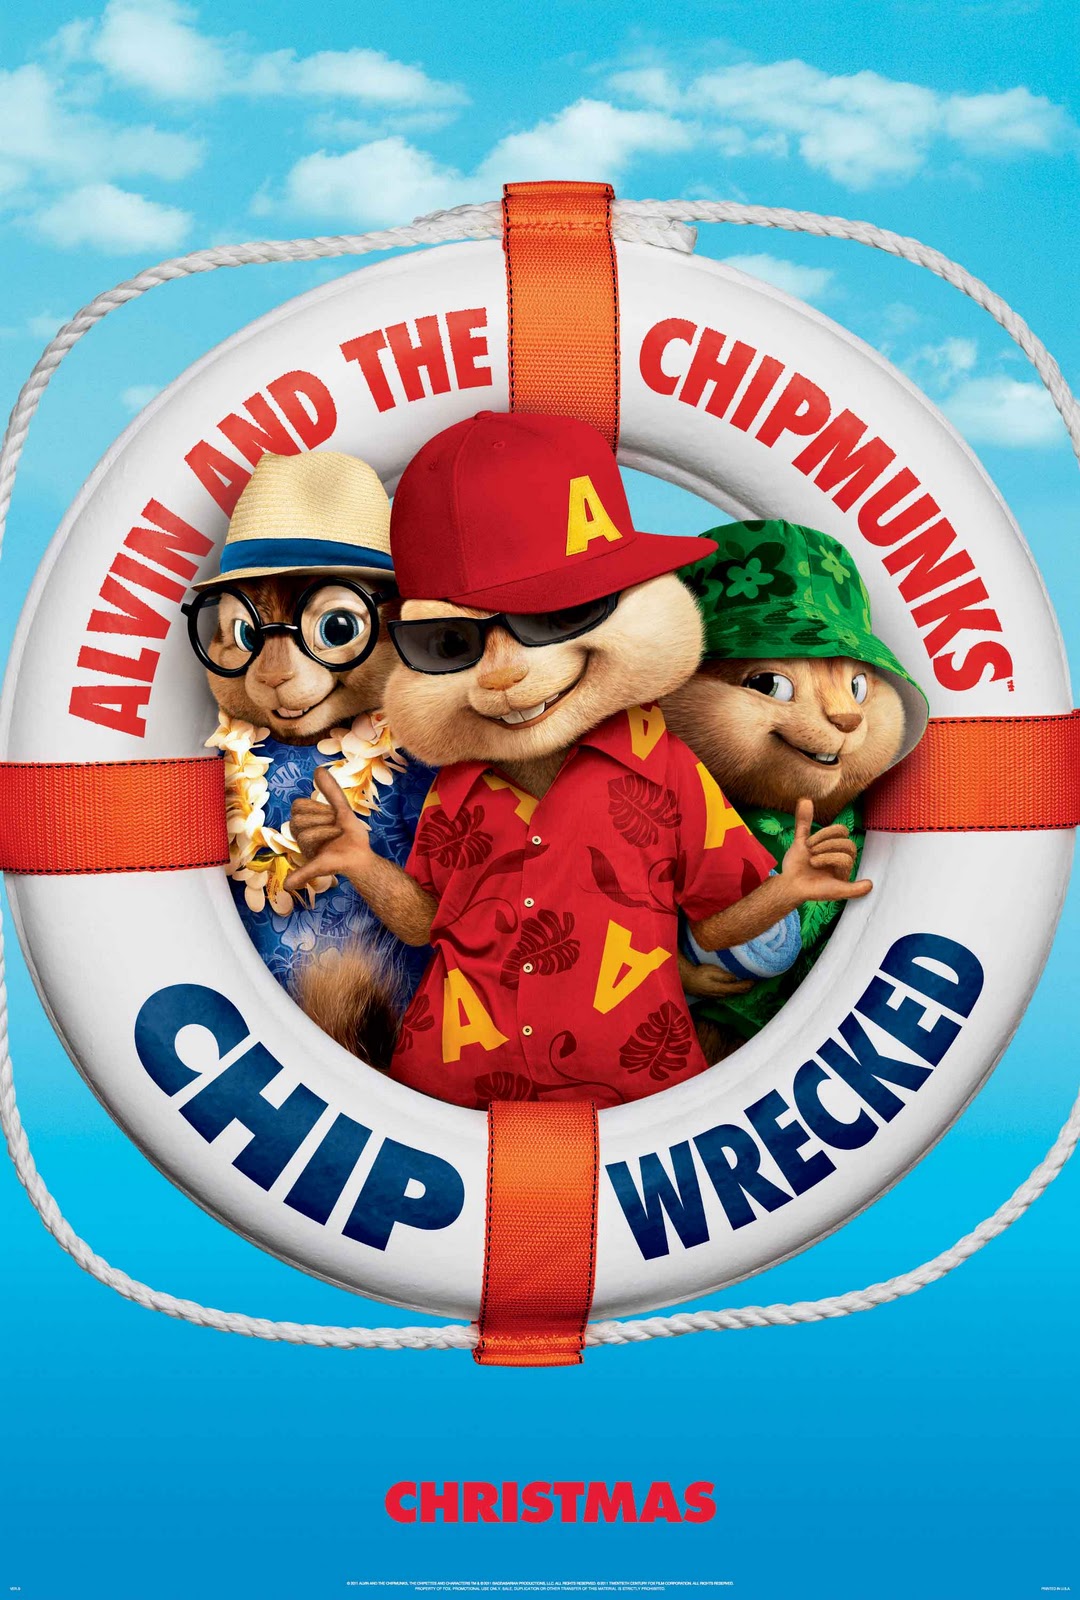 42 Piece Alvin And The Chipmunks 3 Magnetic Jigsaw 